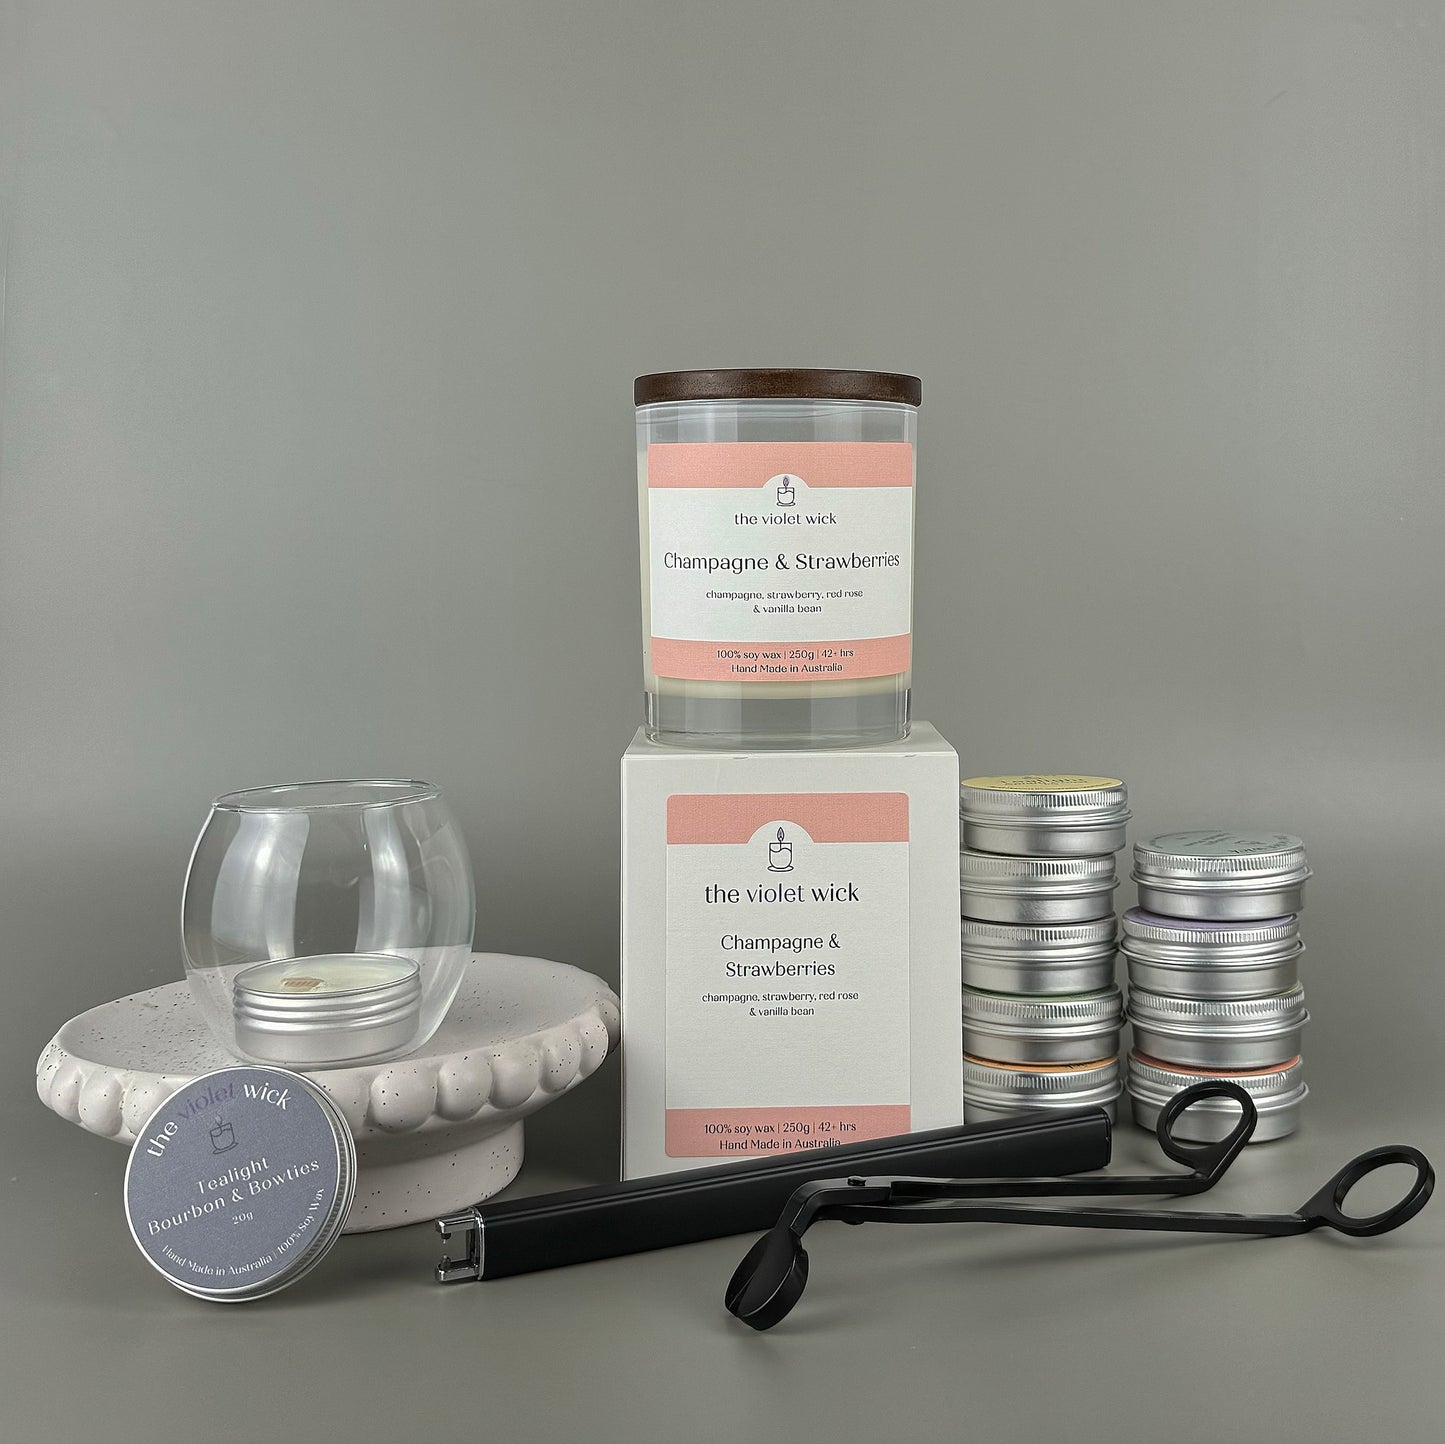 Candle Starter Bundle from The Violet Wick, wick trimmer, tealights, laser lighter and large candle